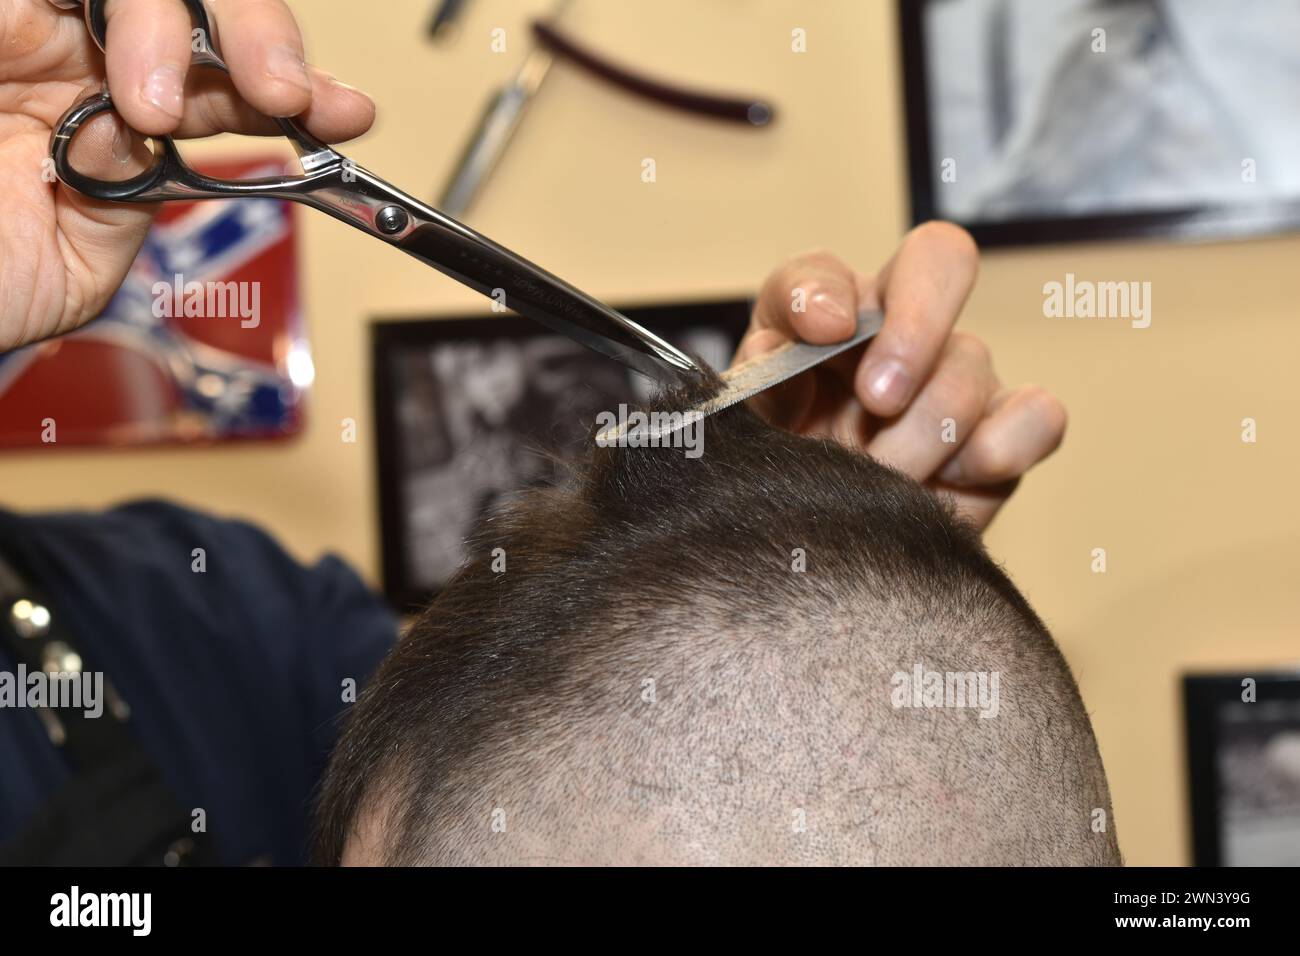 The hairdresser uses scissors, helping himself with a comb, to shorten the hair at the back of the client's head. Stock Photo